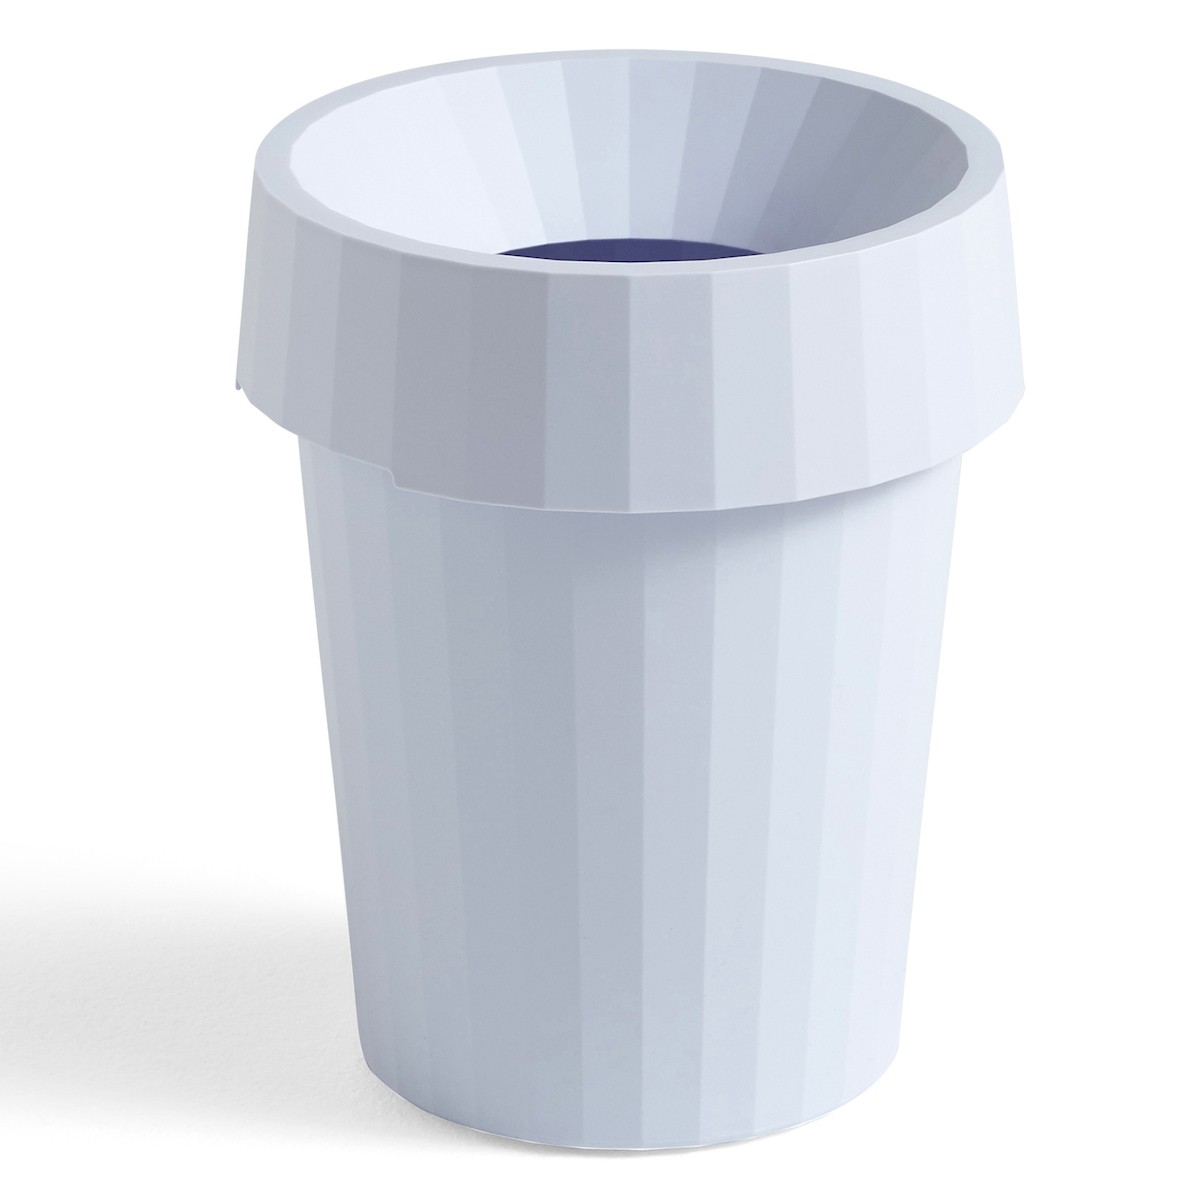 OUT OF STOCK - Lavender - Shade Bin